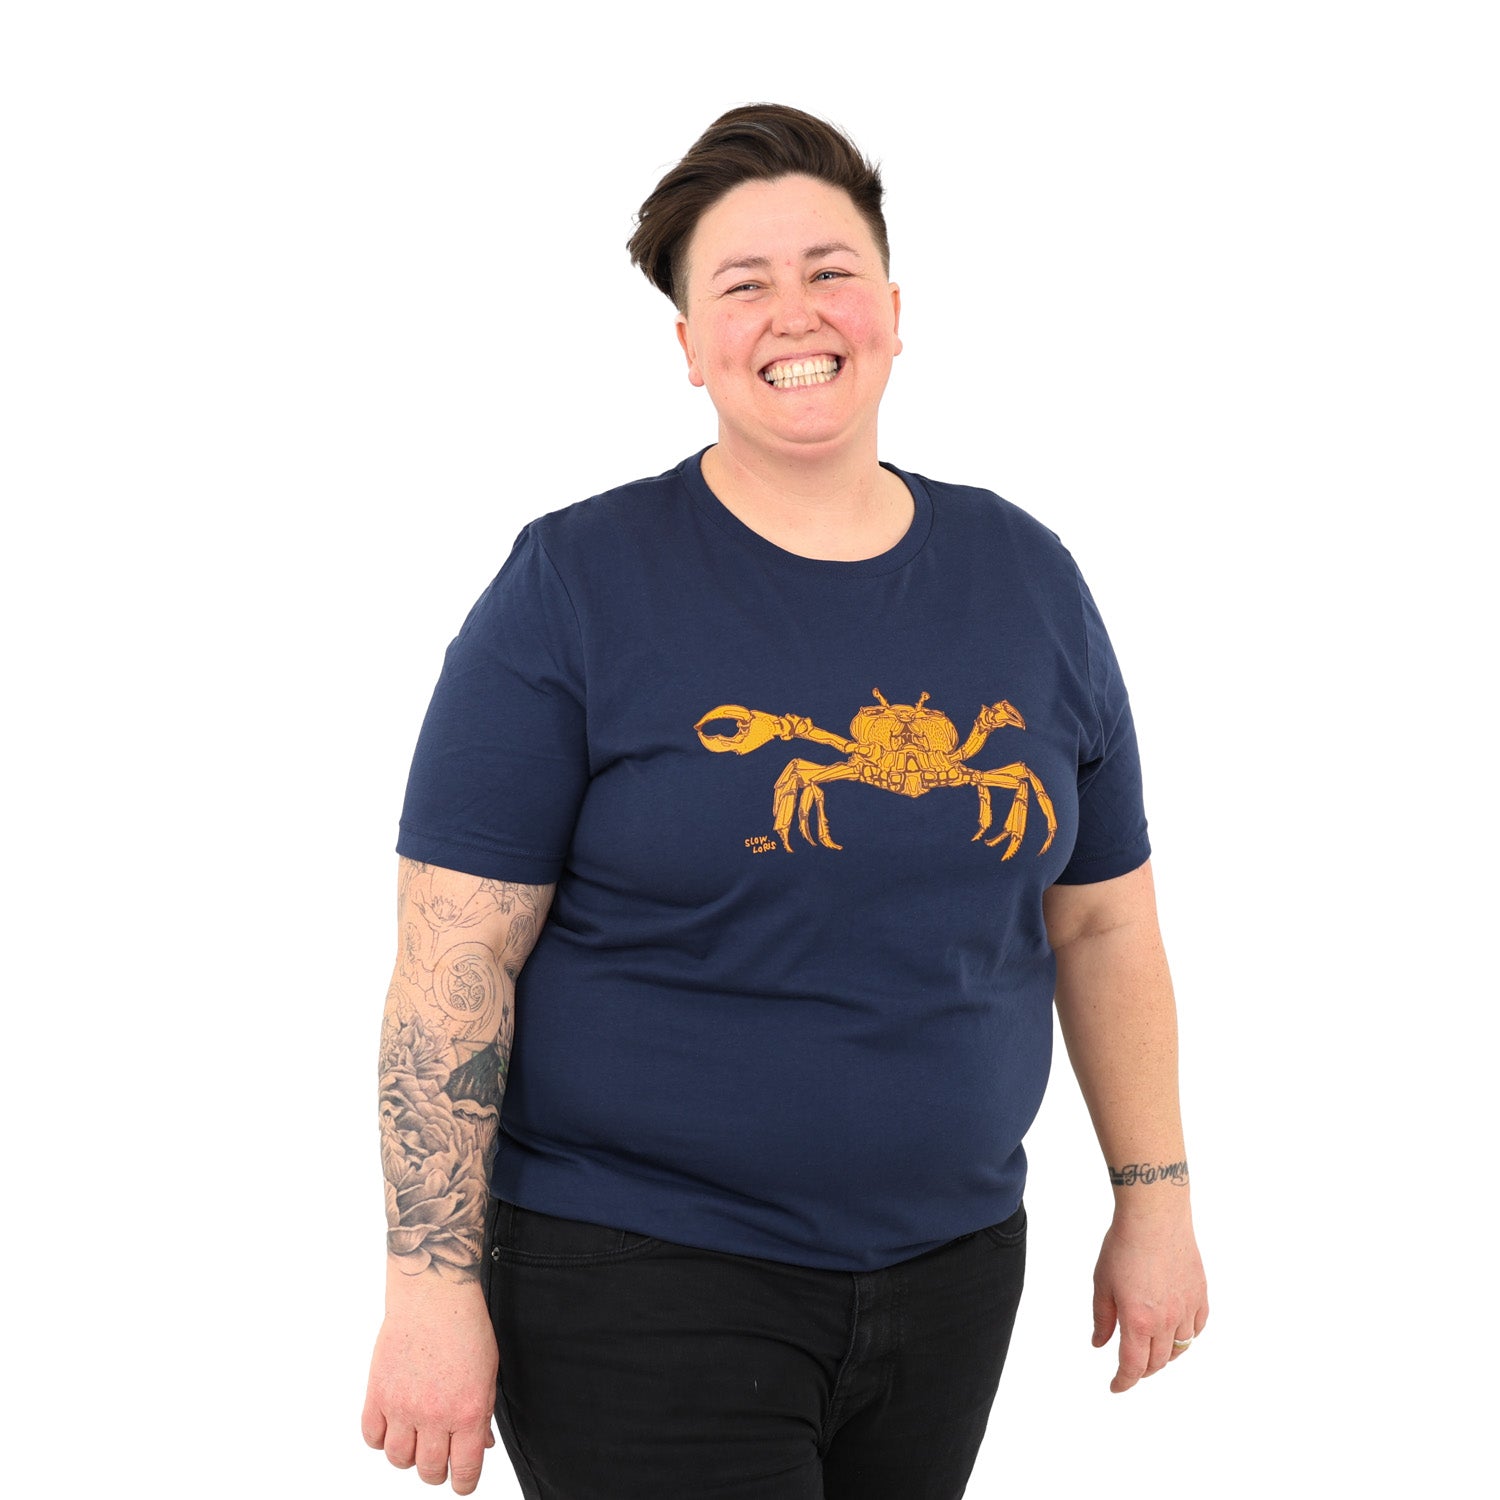 girl with short hair smiling big while wearing black jeans and a blue t-shirt with a crab on it. 